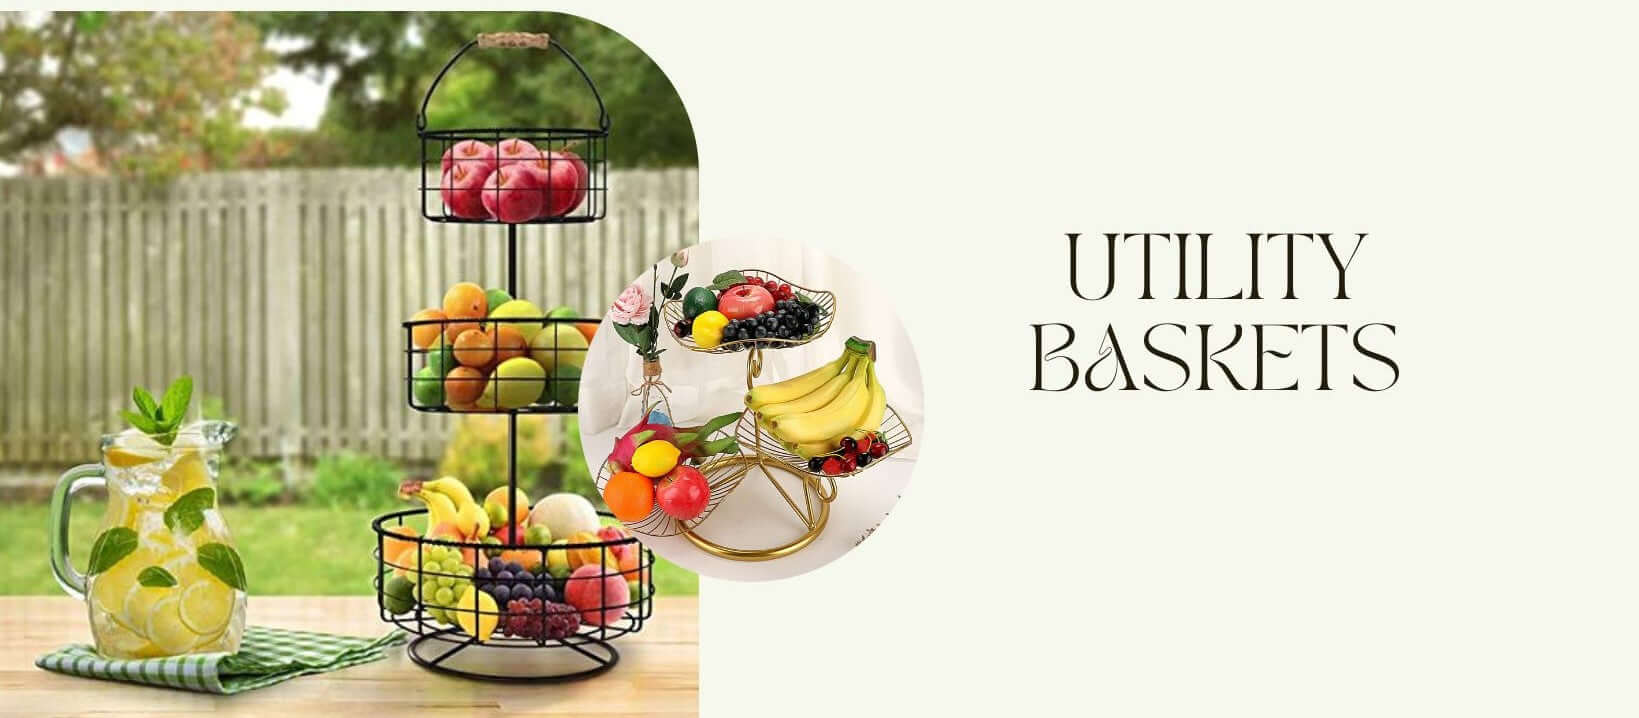 Fruit & Vegetable stand